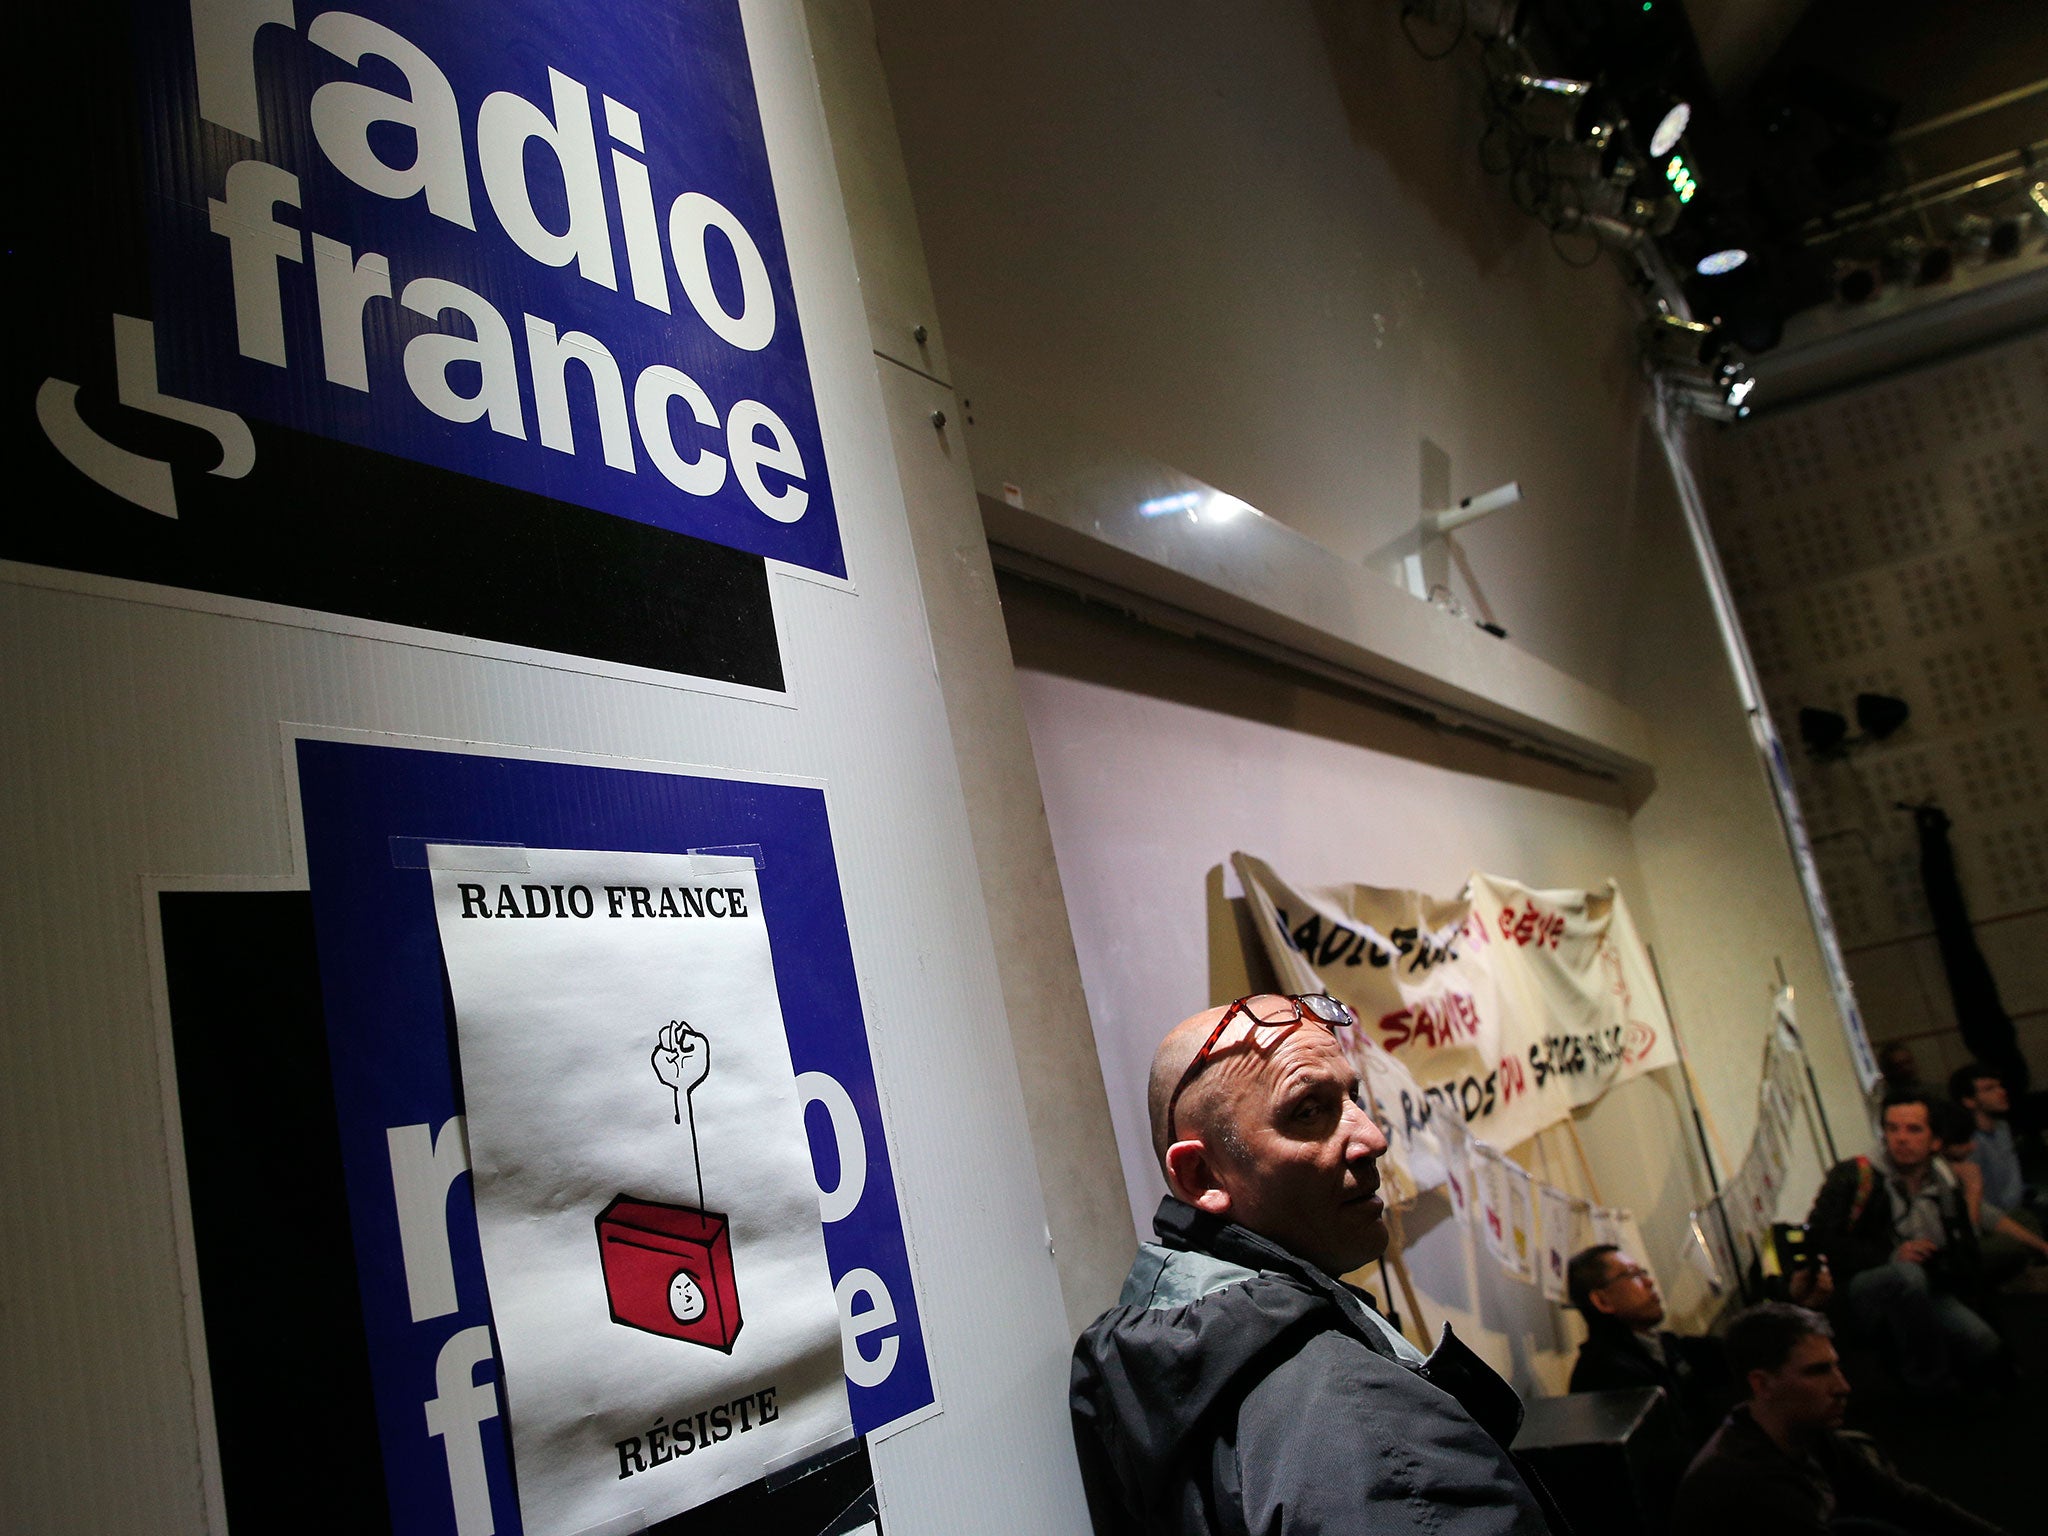 Employees of France's state radio corporation Radio France attend a strike meeting held at the company's headquarters in Paris, France